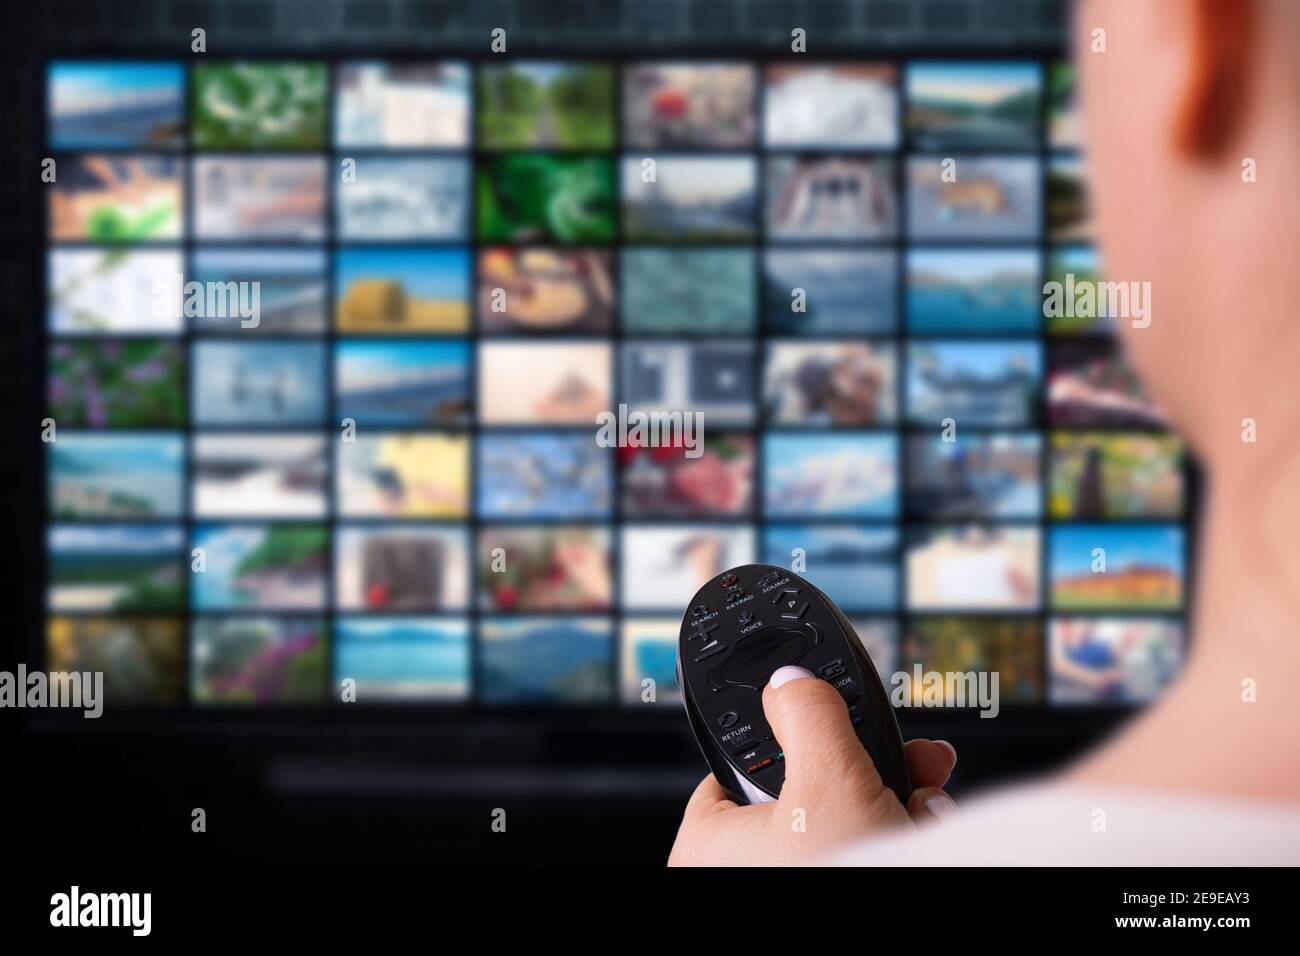 woman hold remote control video service on demand on background TV with VOD provider icon